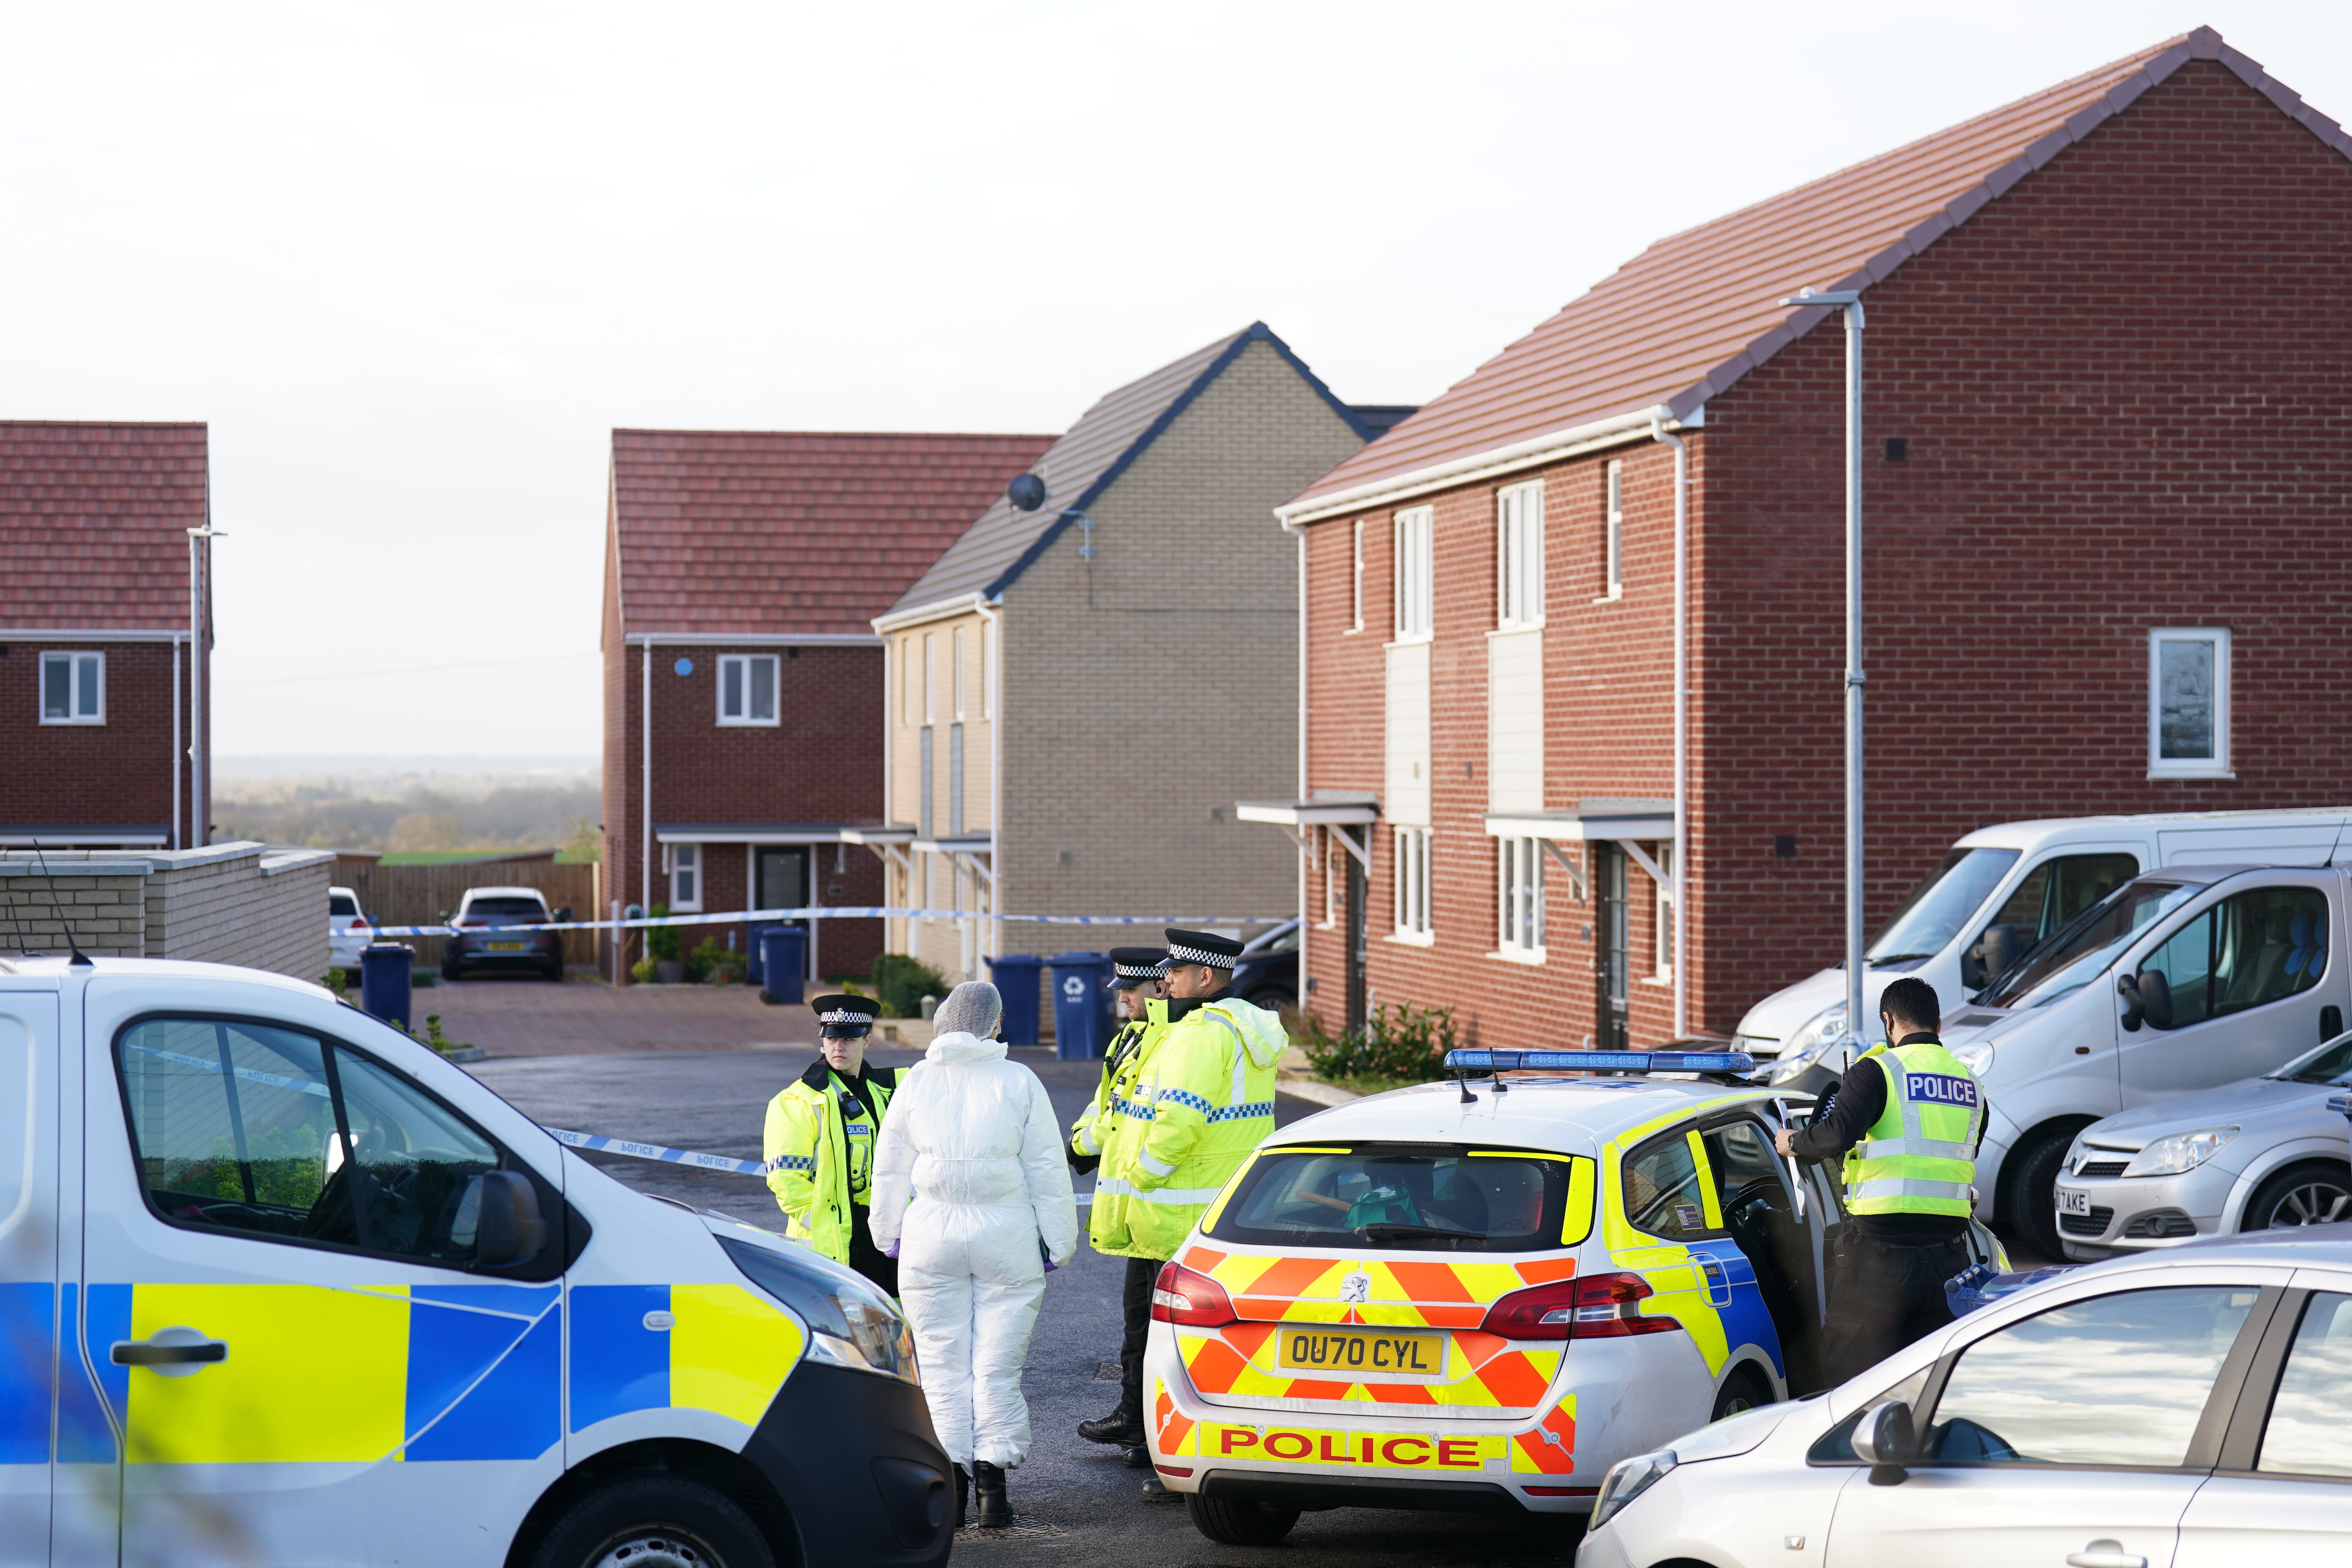 Police at the scene in Meridian Close, Bluntisham, Cambridgeshire, where police found the body of a 32-year-old man with a gunshot wound on Wednesday evening